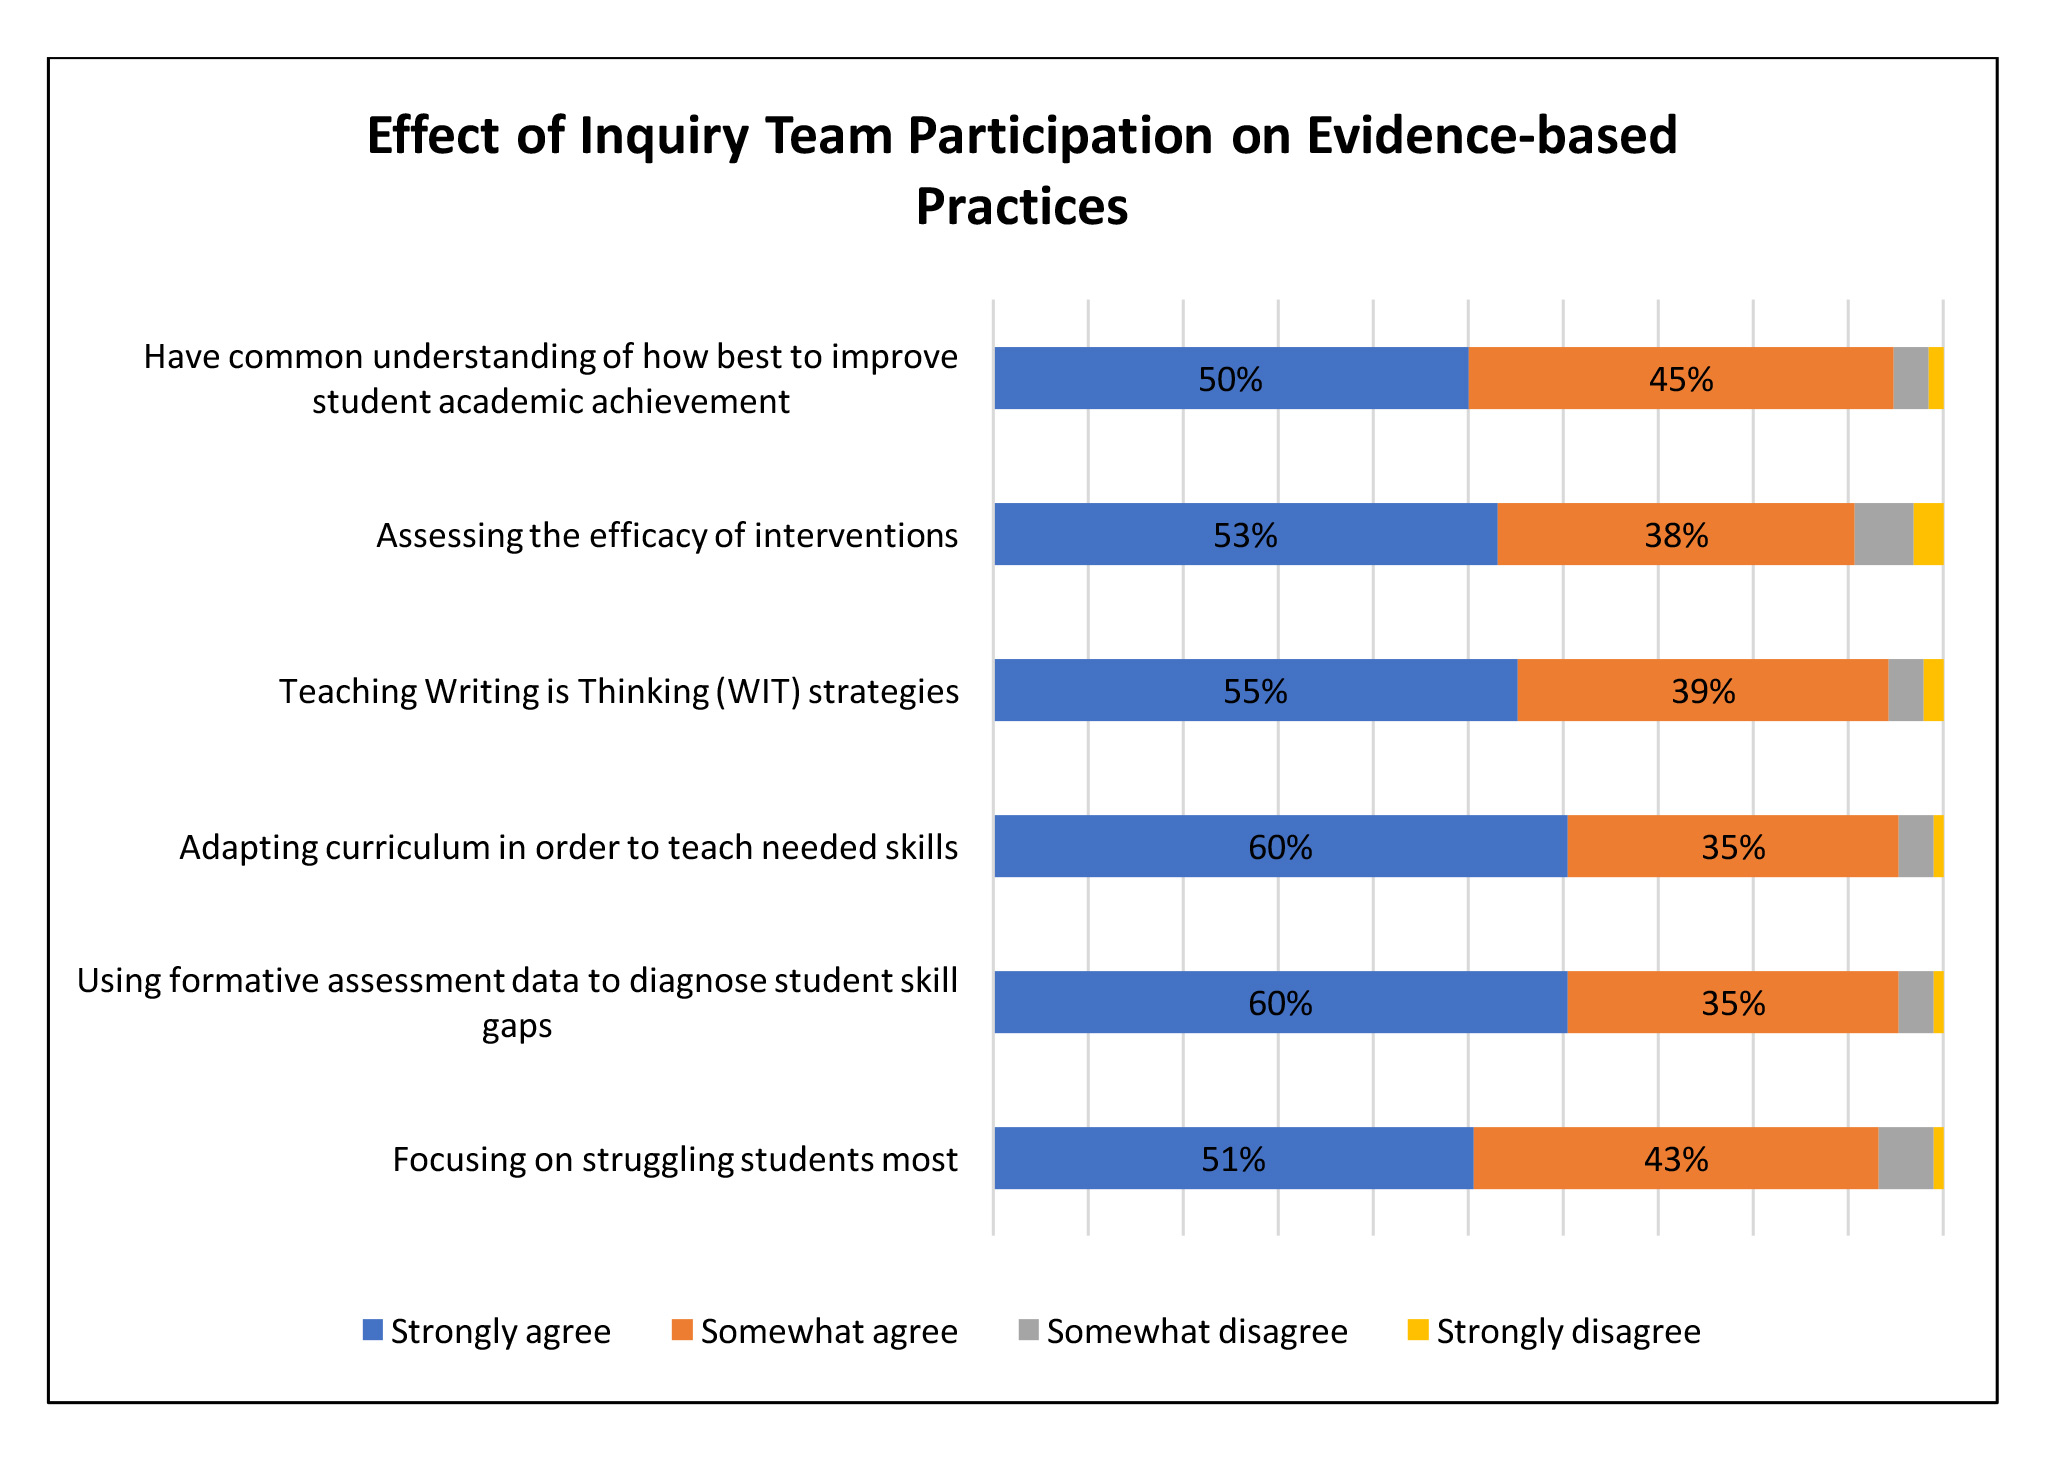 Effect of Inquiry Participation on Improvement of Evidence-based Practices